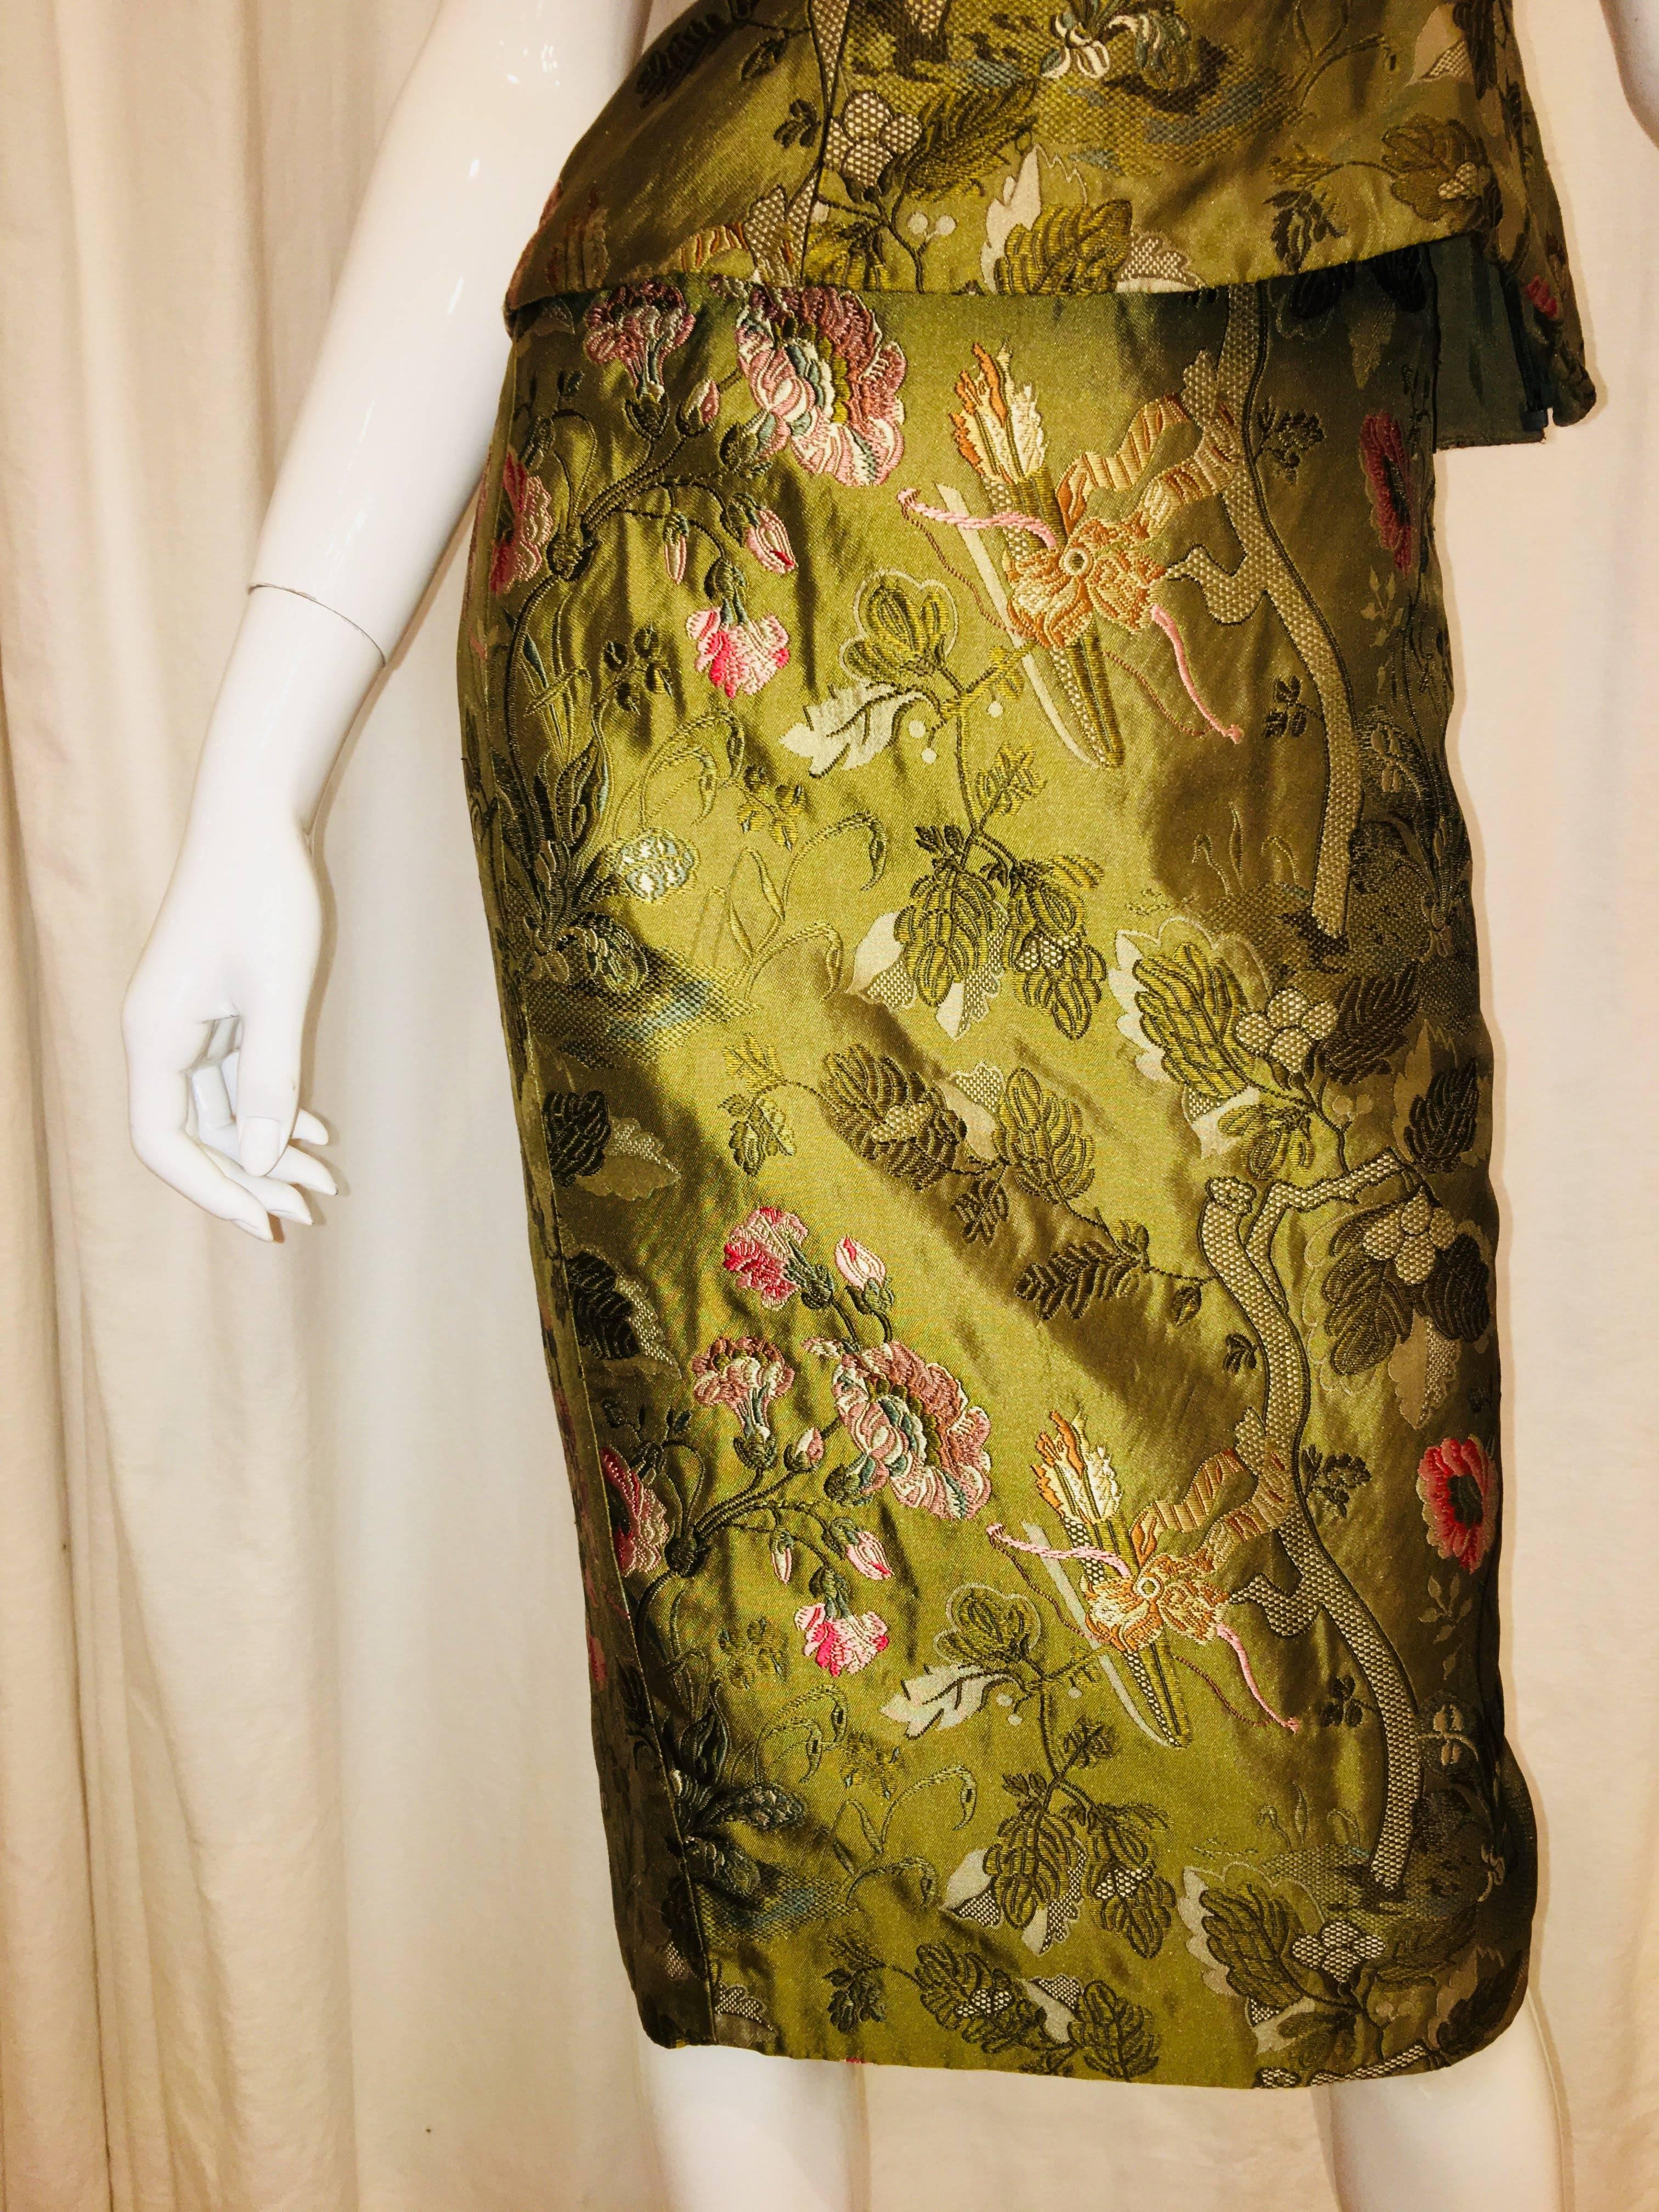 Ralph Lauren Green Floral Silk 2 Piece with High Waisted Pencil Skirt and Spaghetti Strap Top.